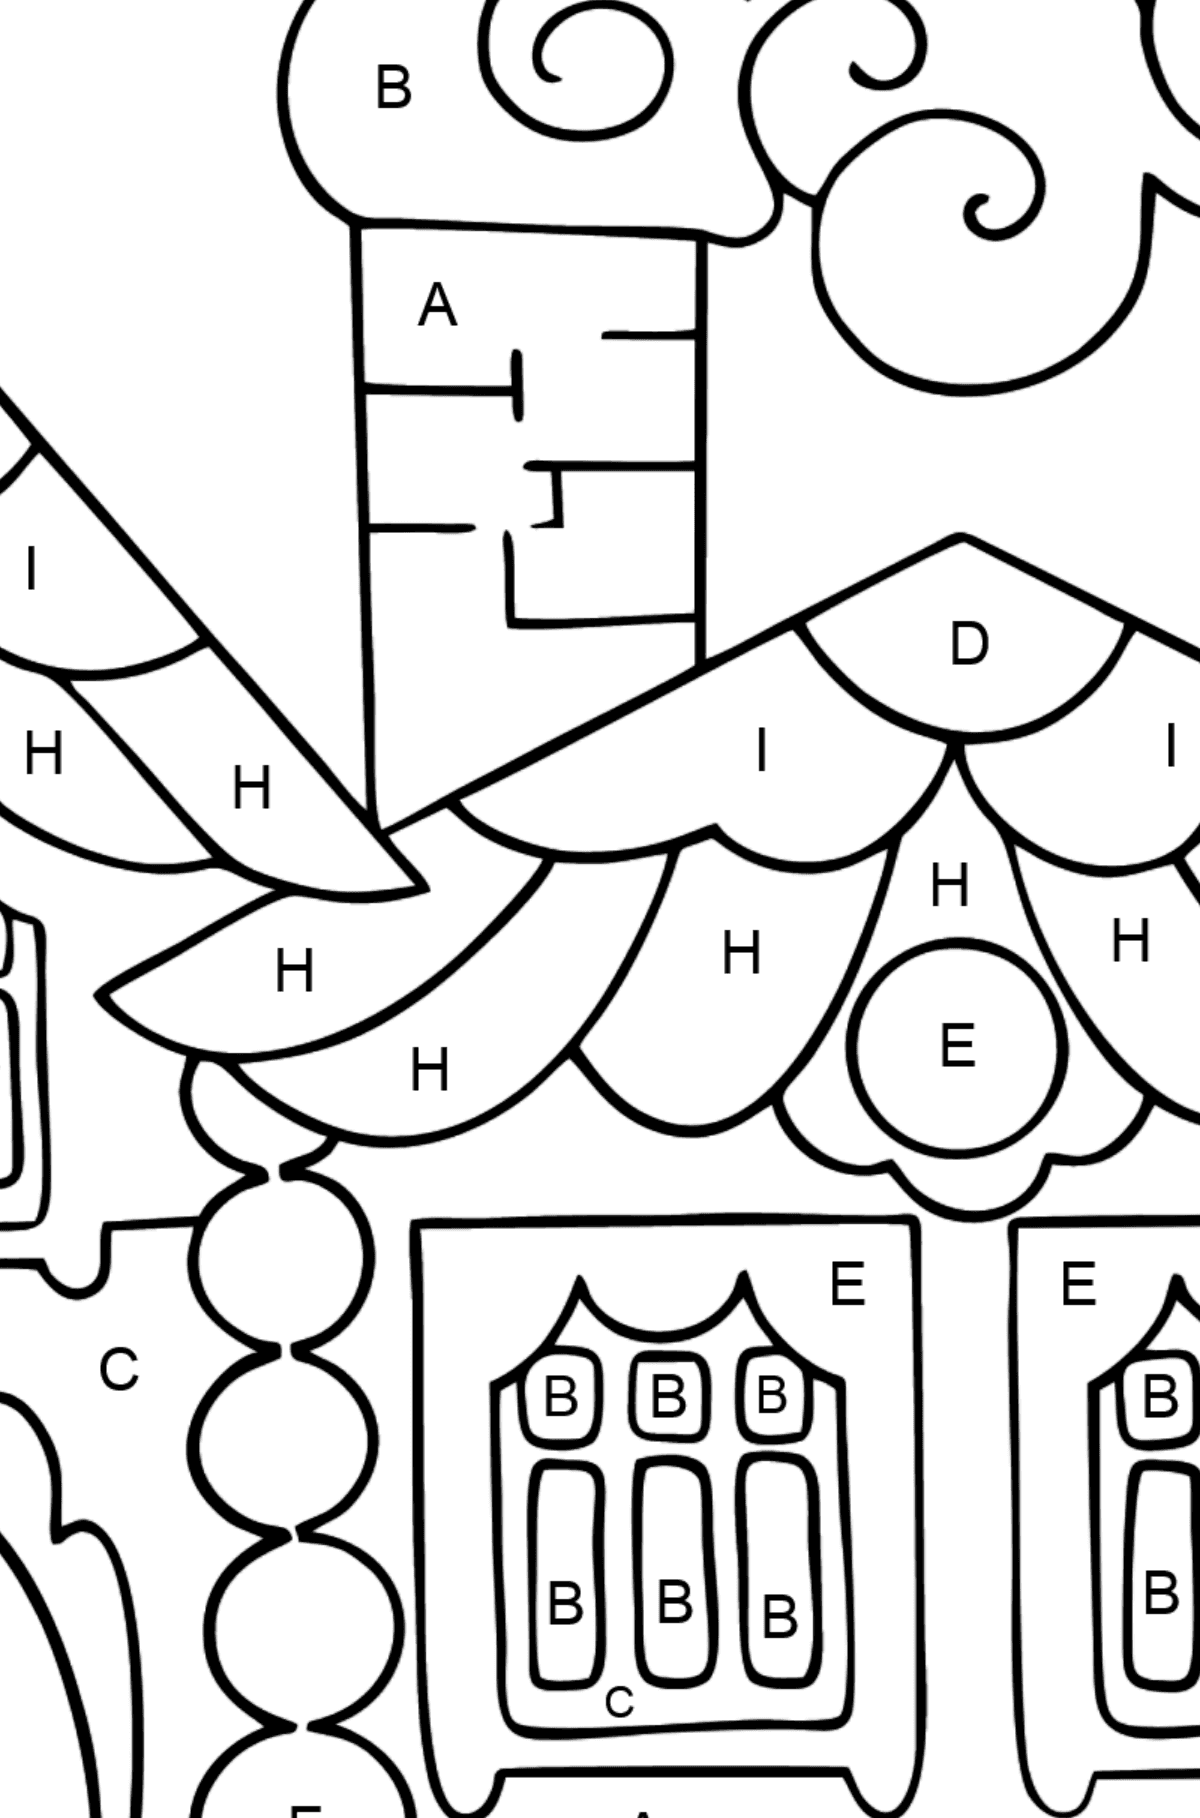 House in the Forest Coloring Page (difficult) - Coloring by Letters for Kids